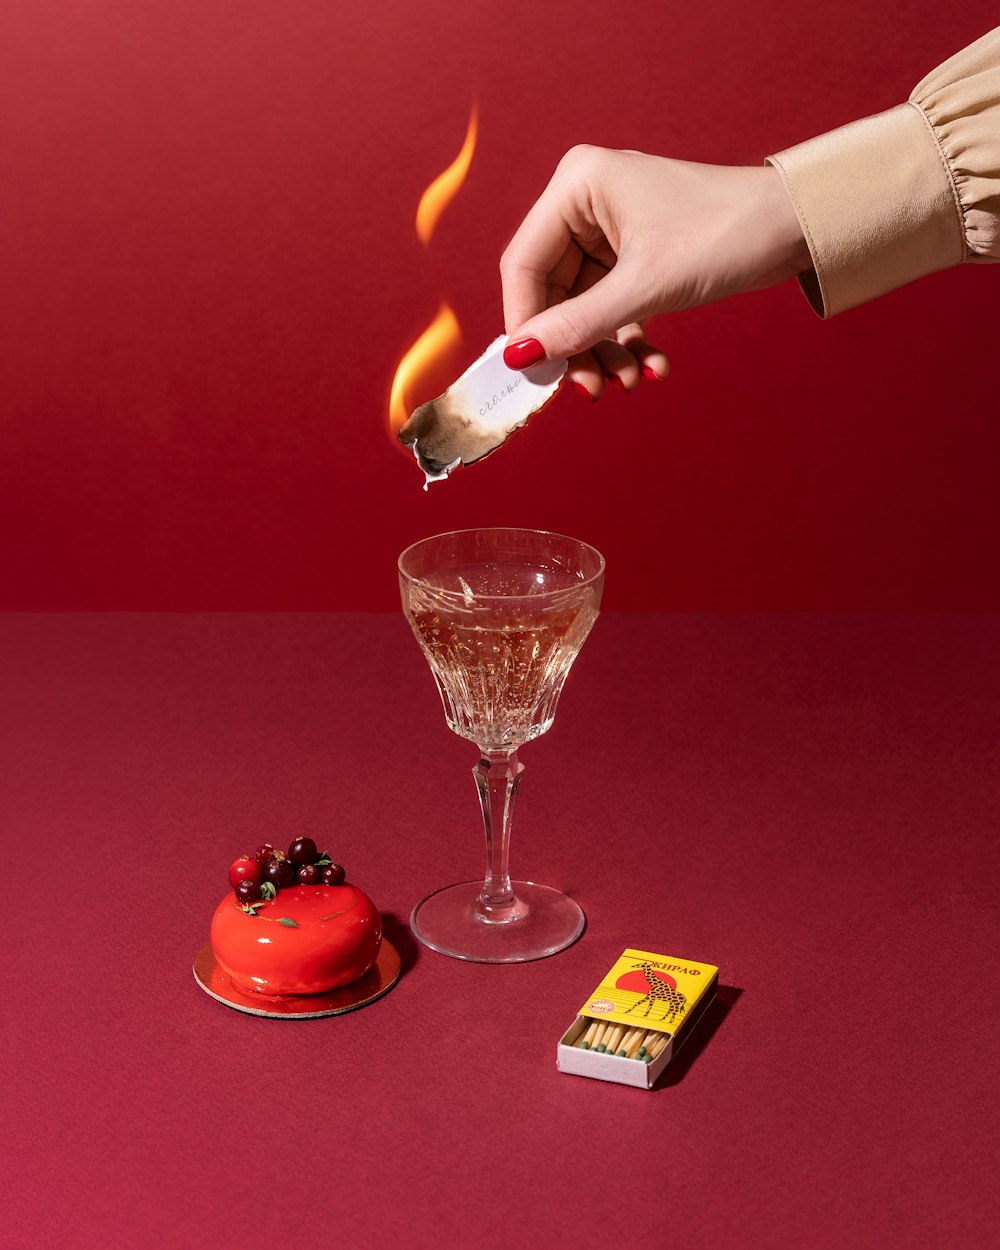 a person is holding a lighter over a small red cake